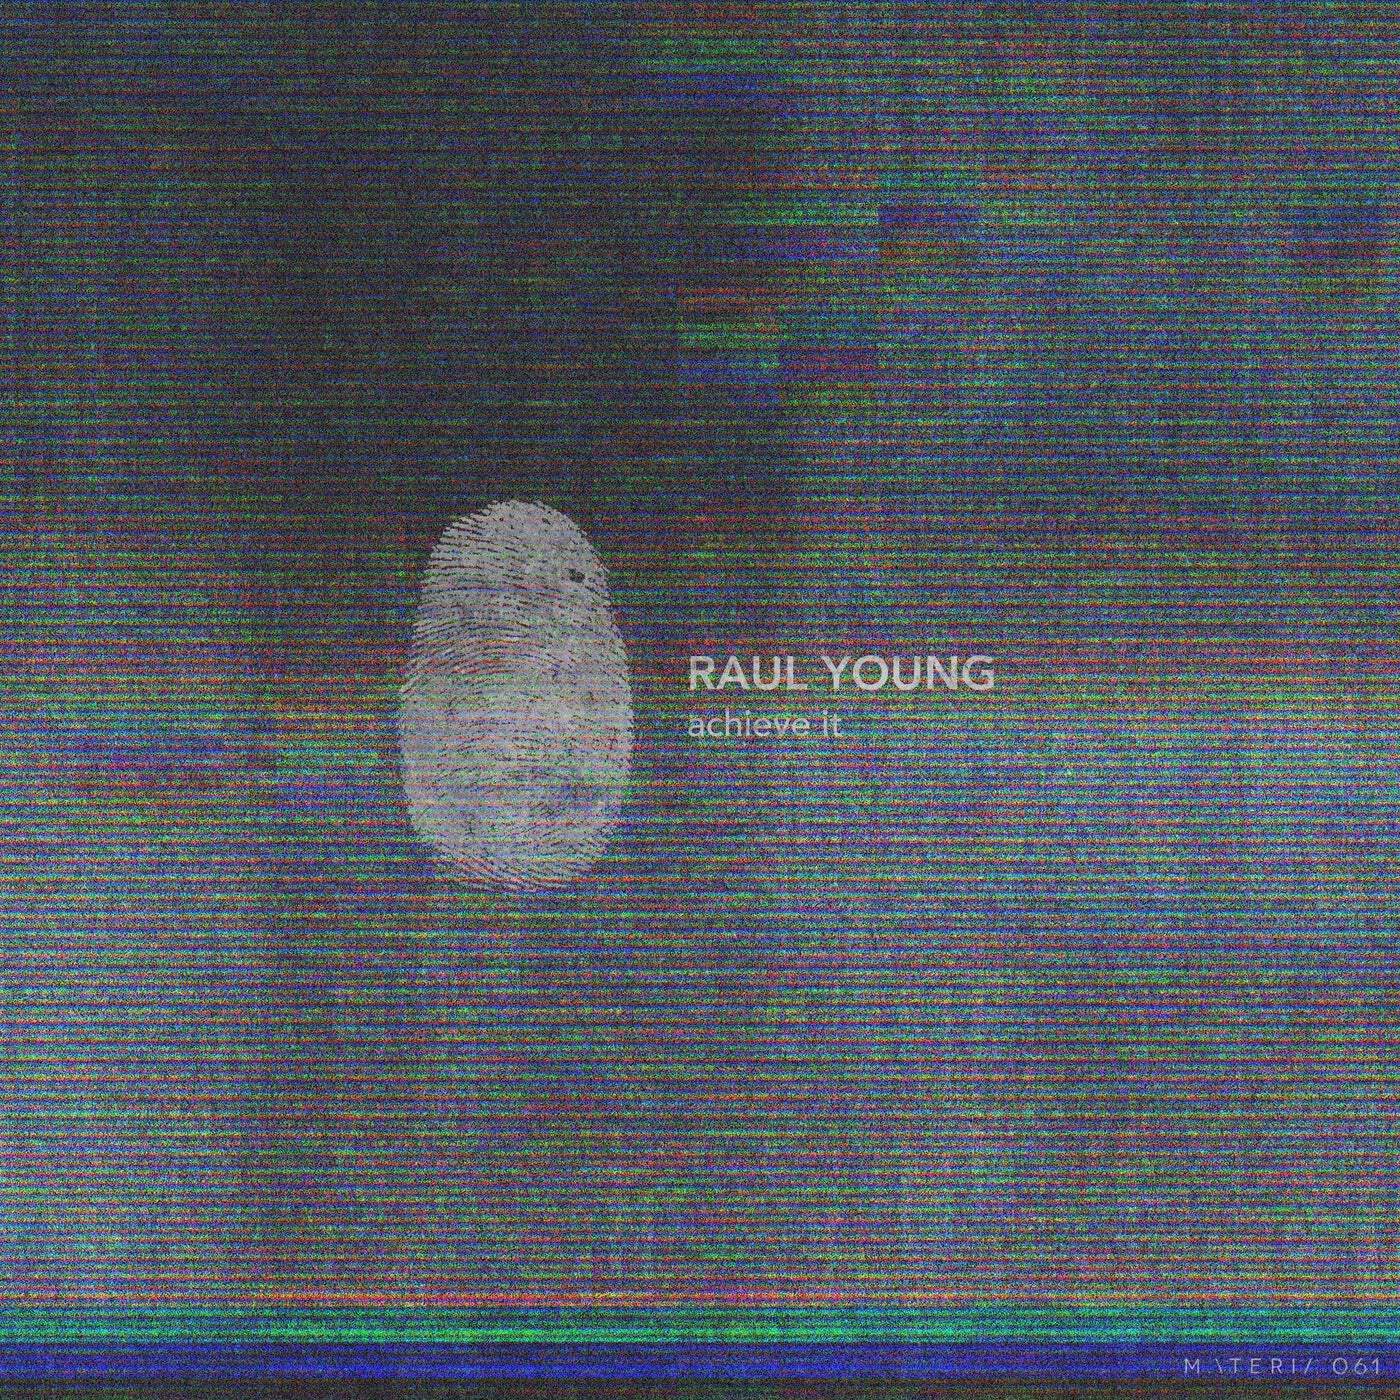 Download Raul Young - Achieve It EP on Electrobuzz